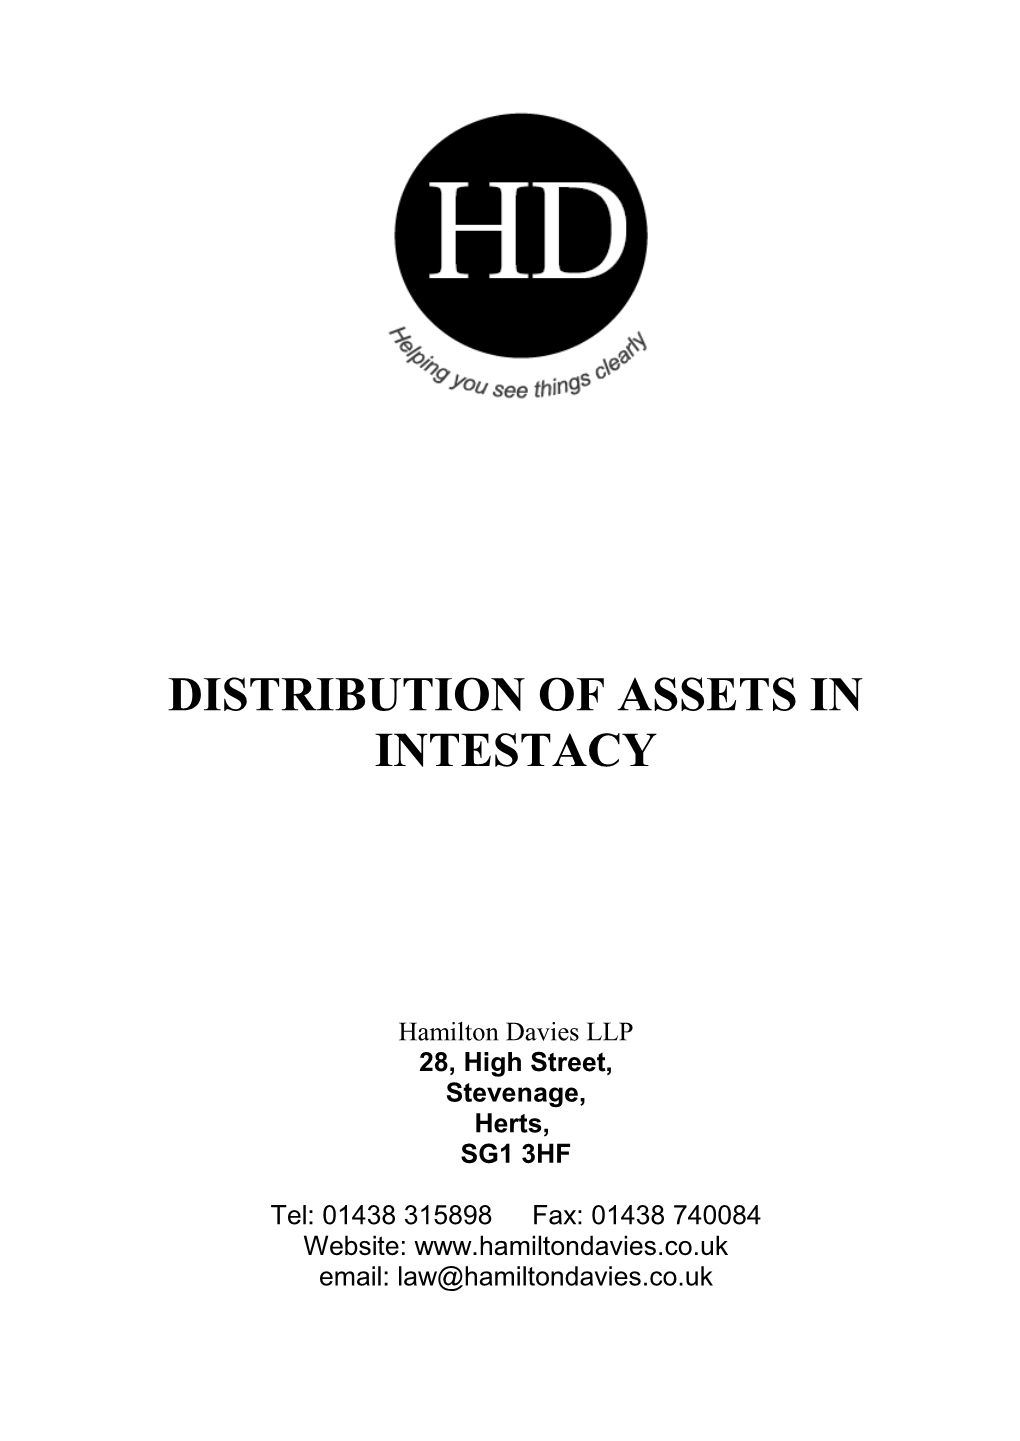 Distribution of Assets in Intestacy